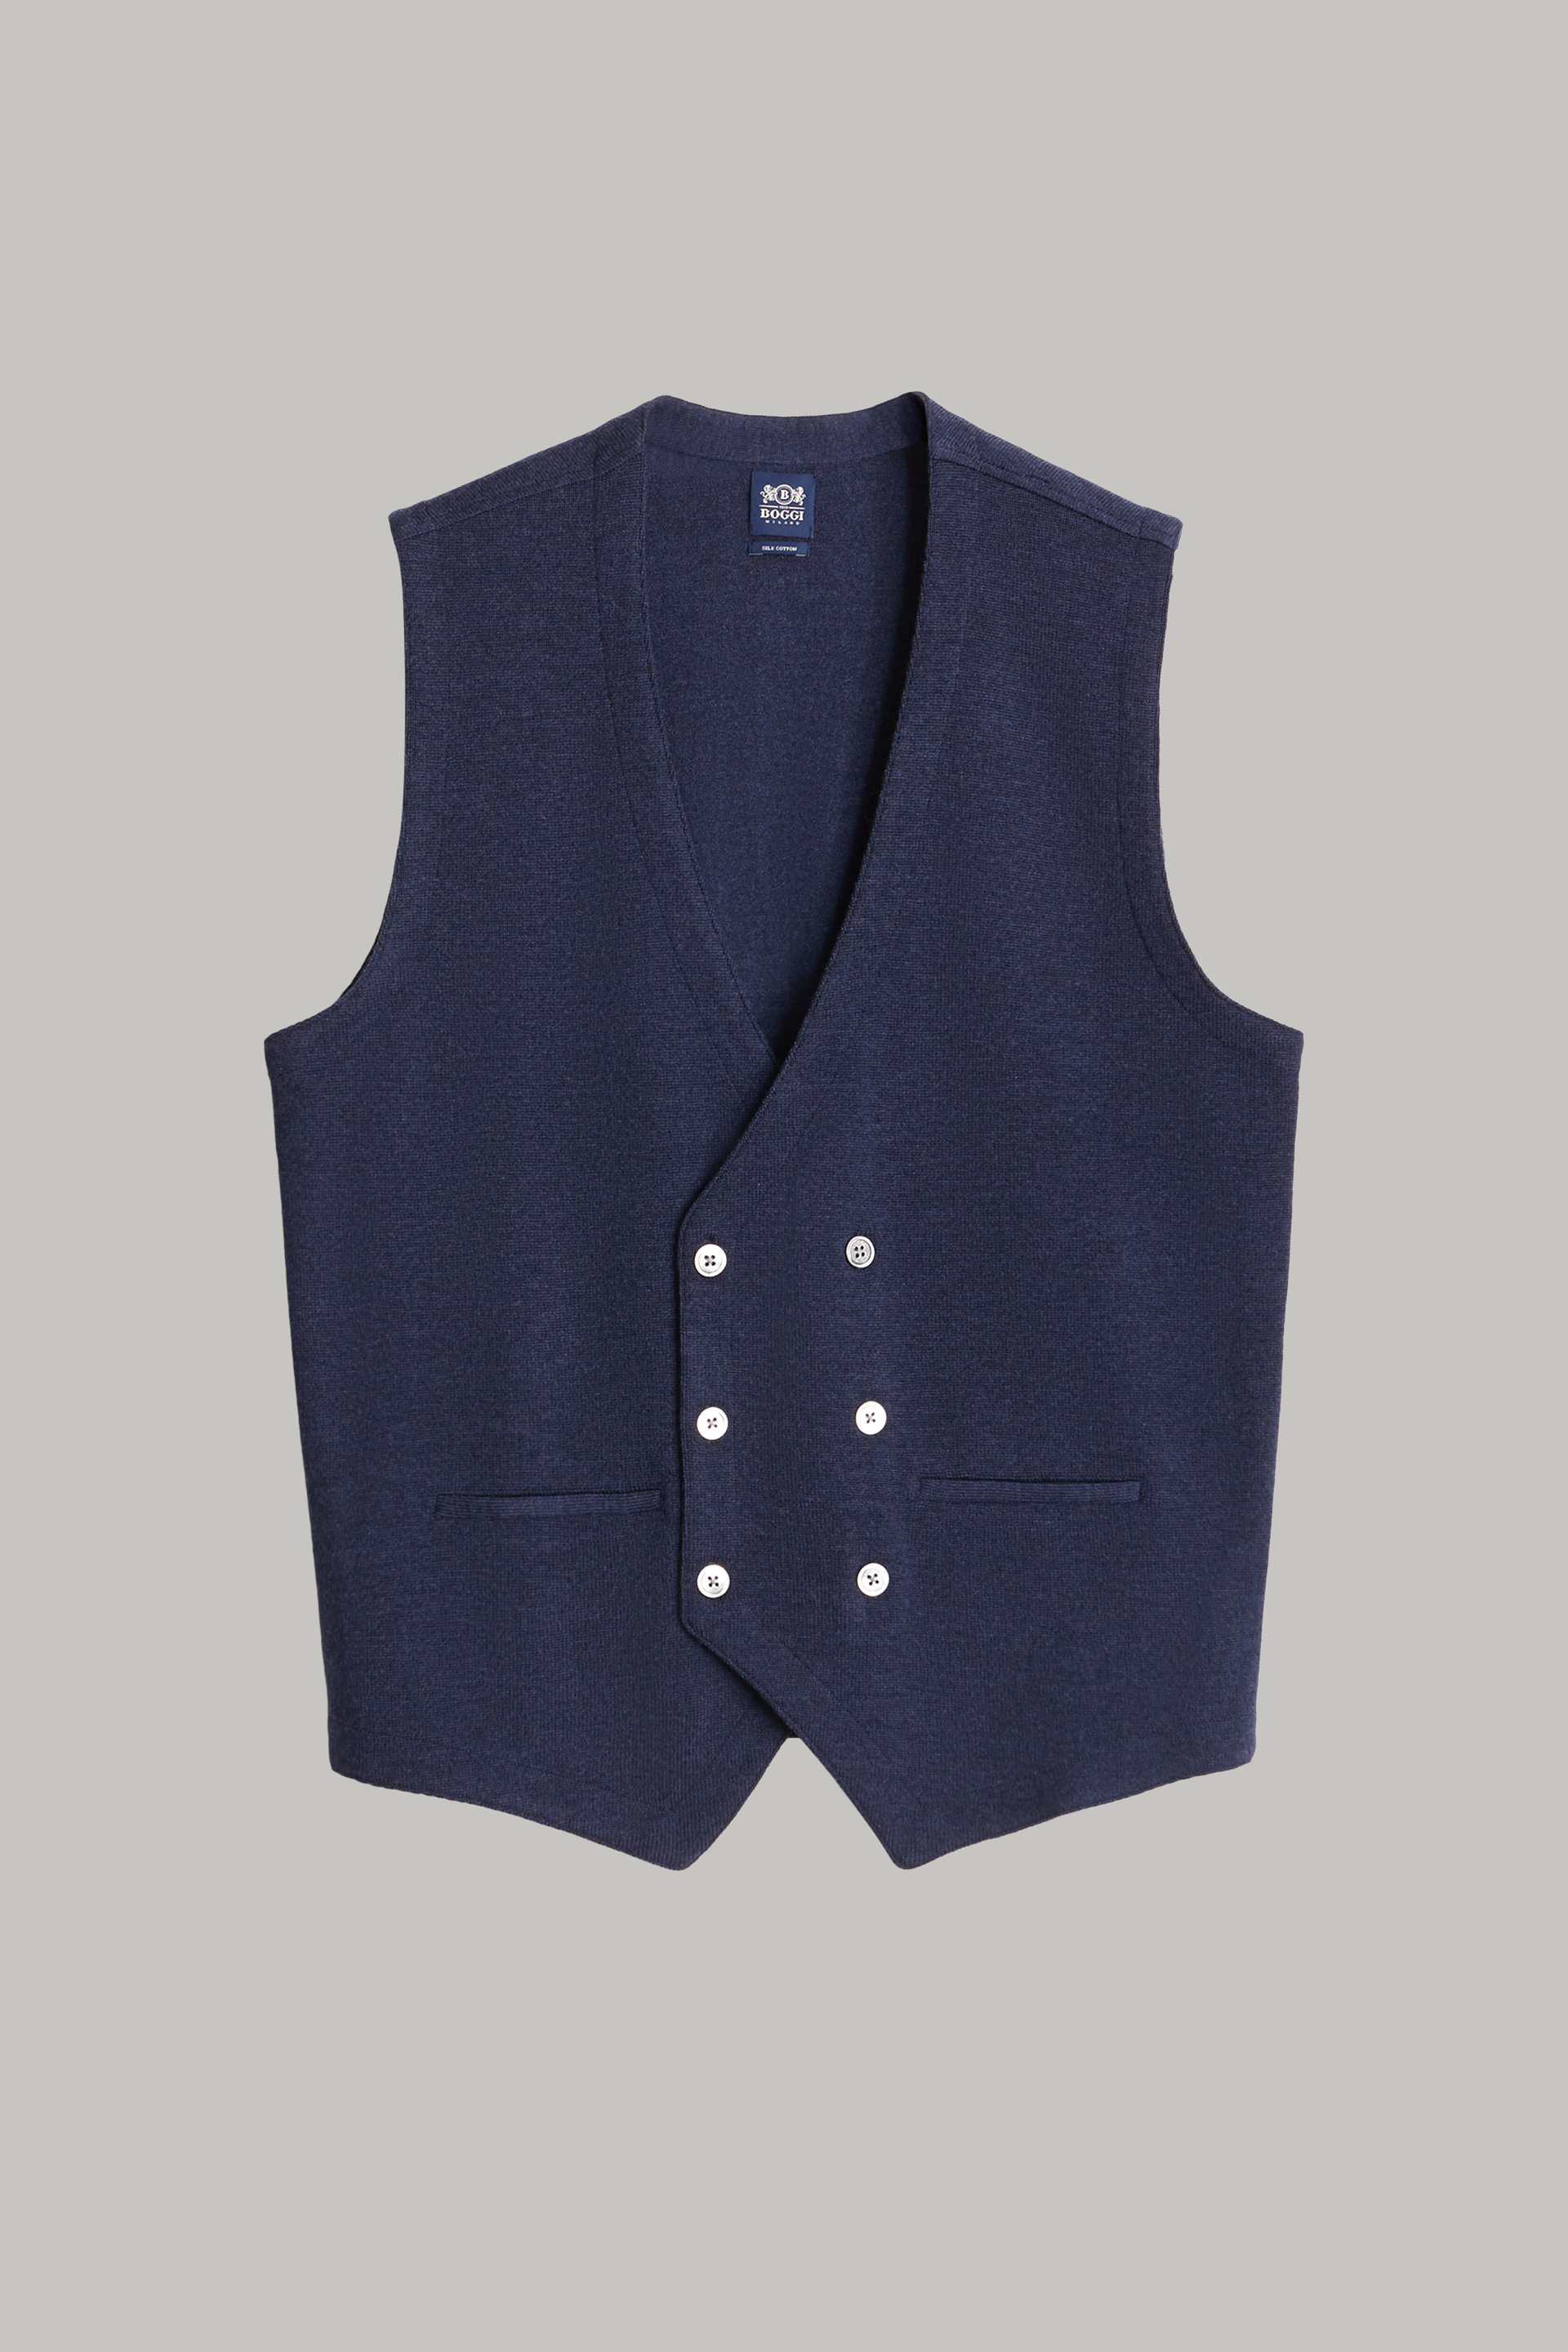 gilet homme double boutonnage